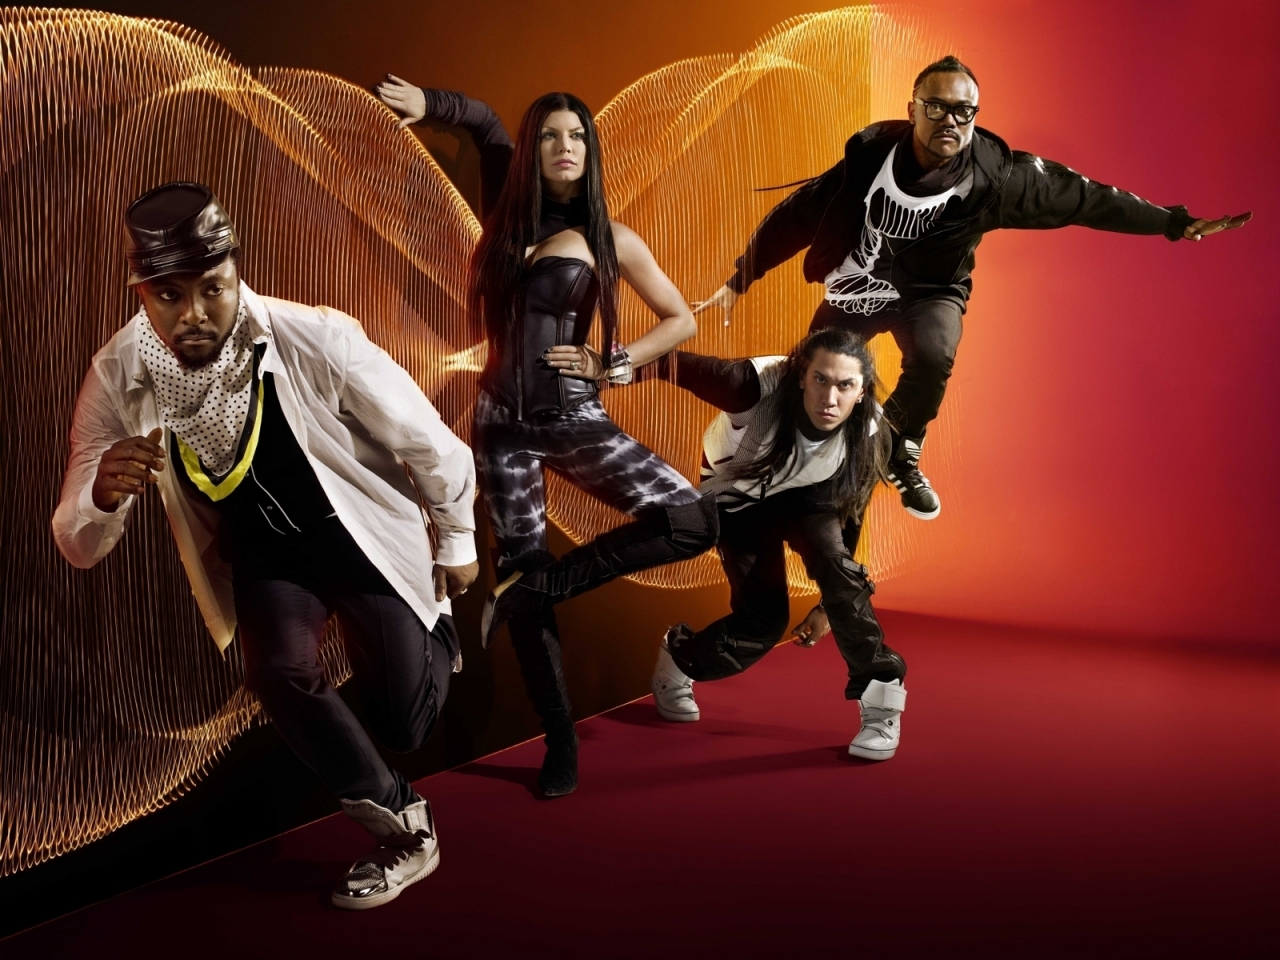 Black Eyed Peas Poster for 1280 x 960 resolution